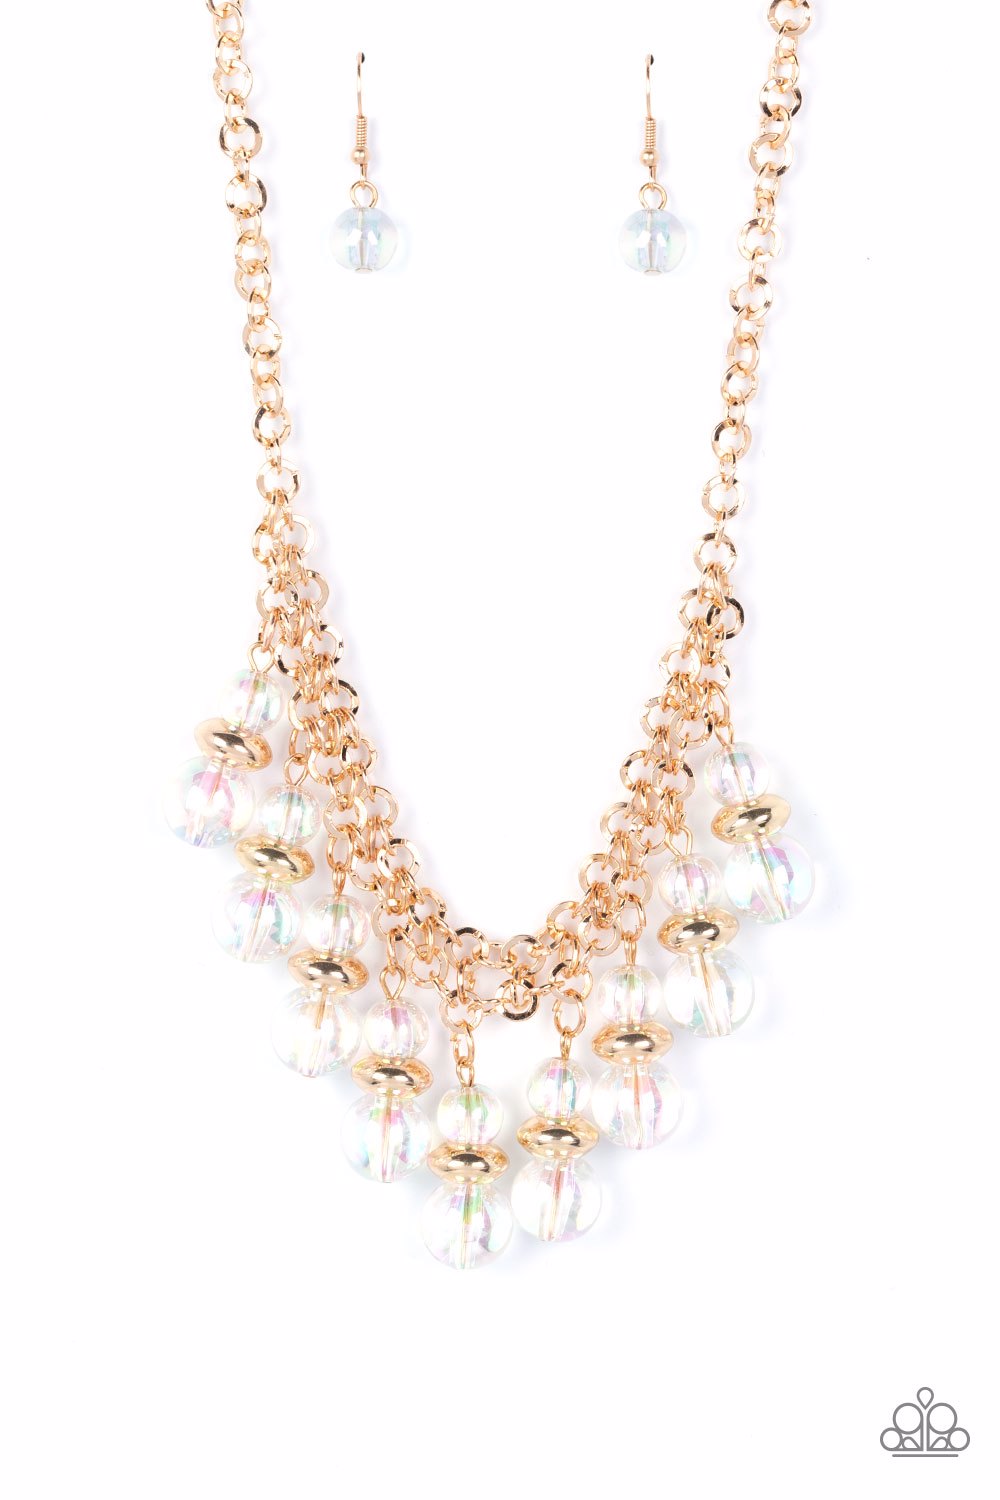 Beaded Necklace Iridescent Jewelry in Gold Chain - Deep Space Diva